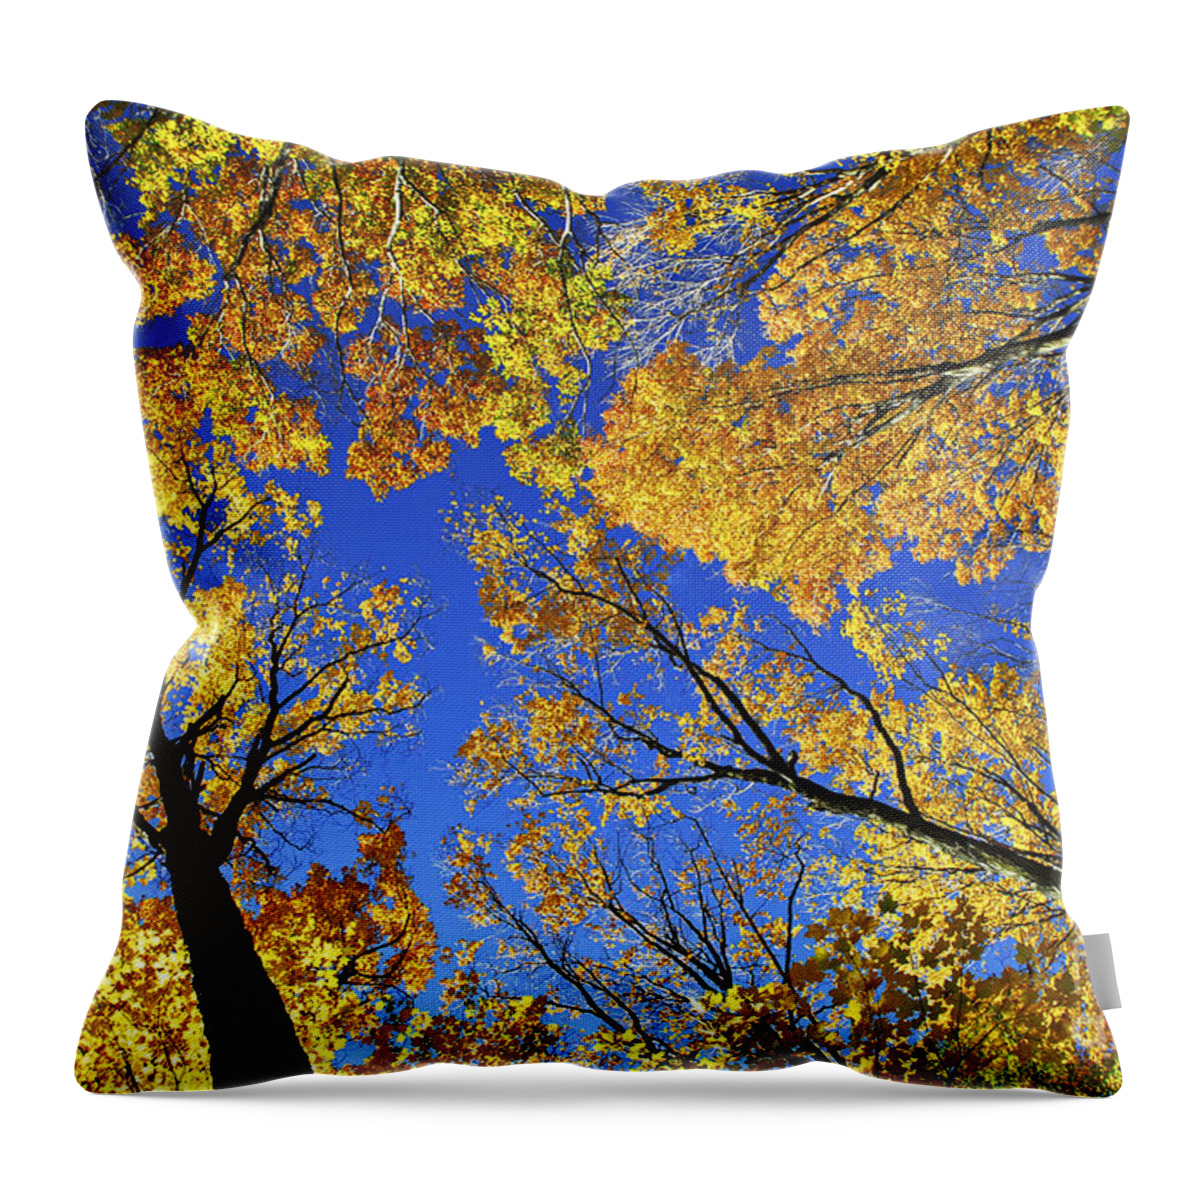 Treetops Throw Pillow featuring the photograph Autumn treetops by Elena Elisseeva